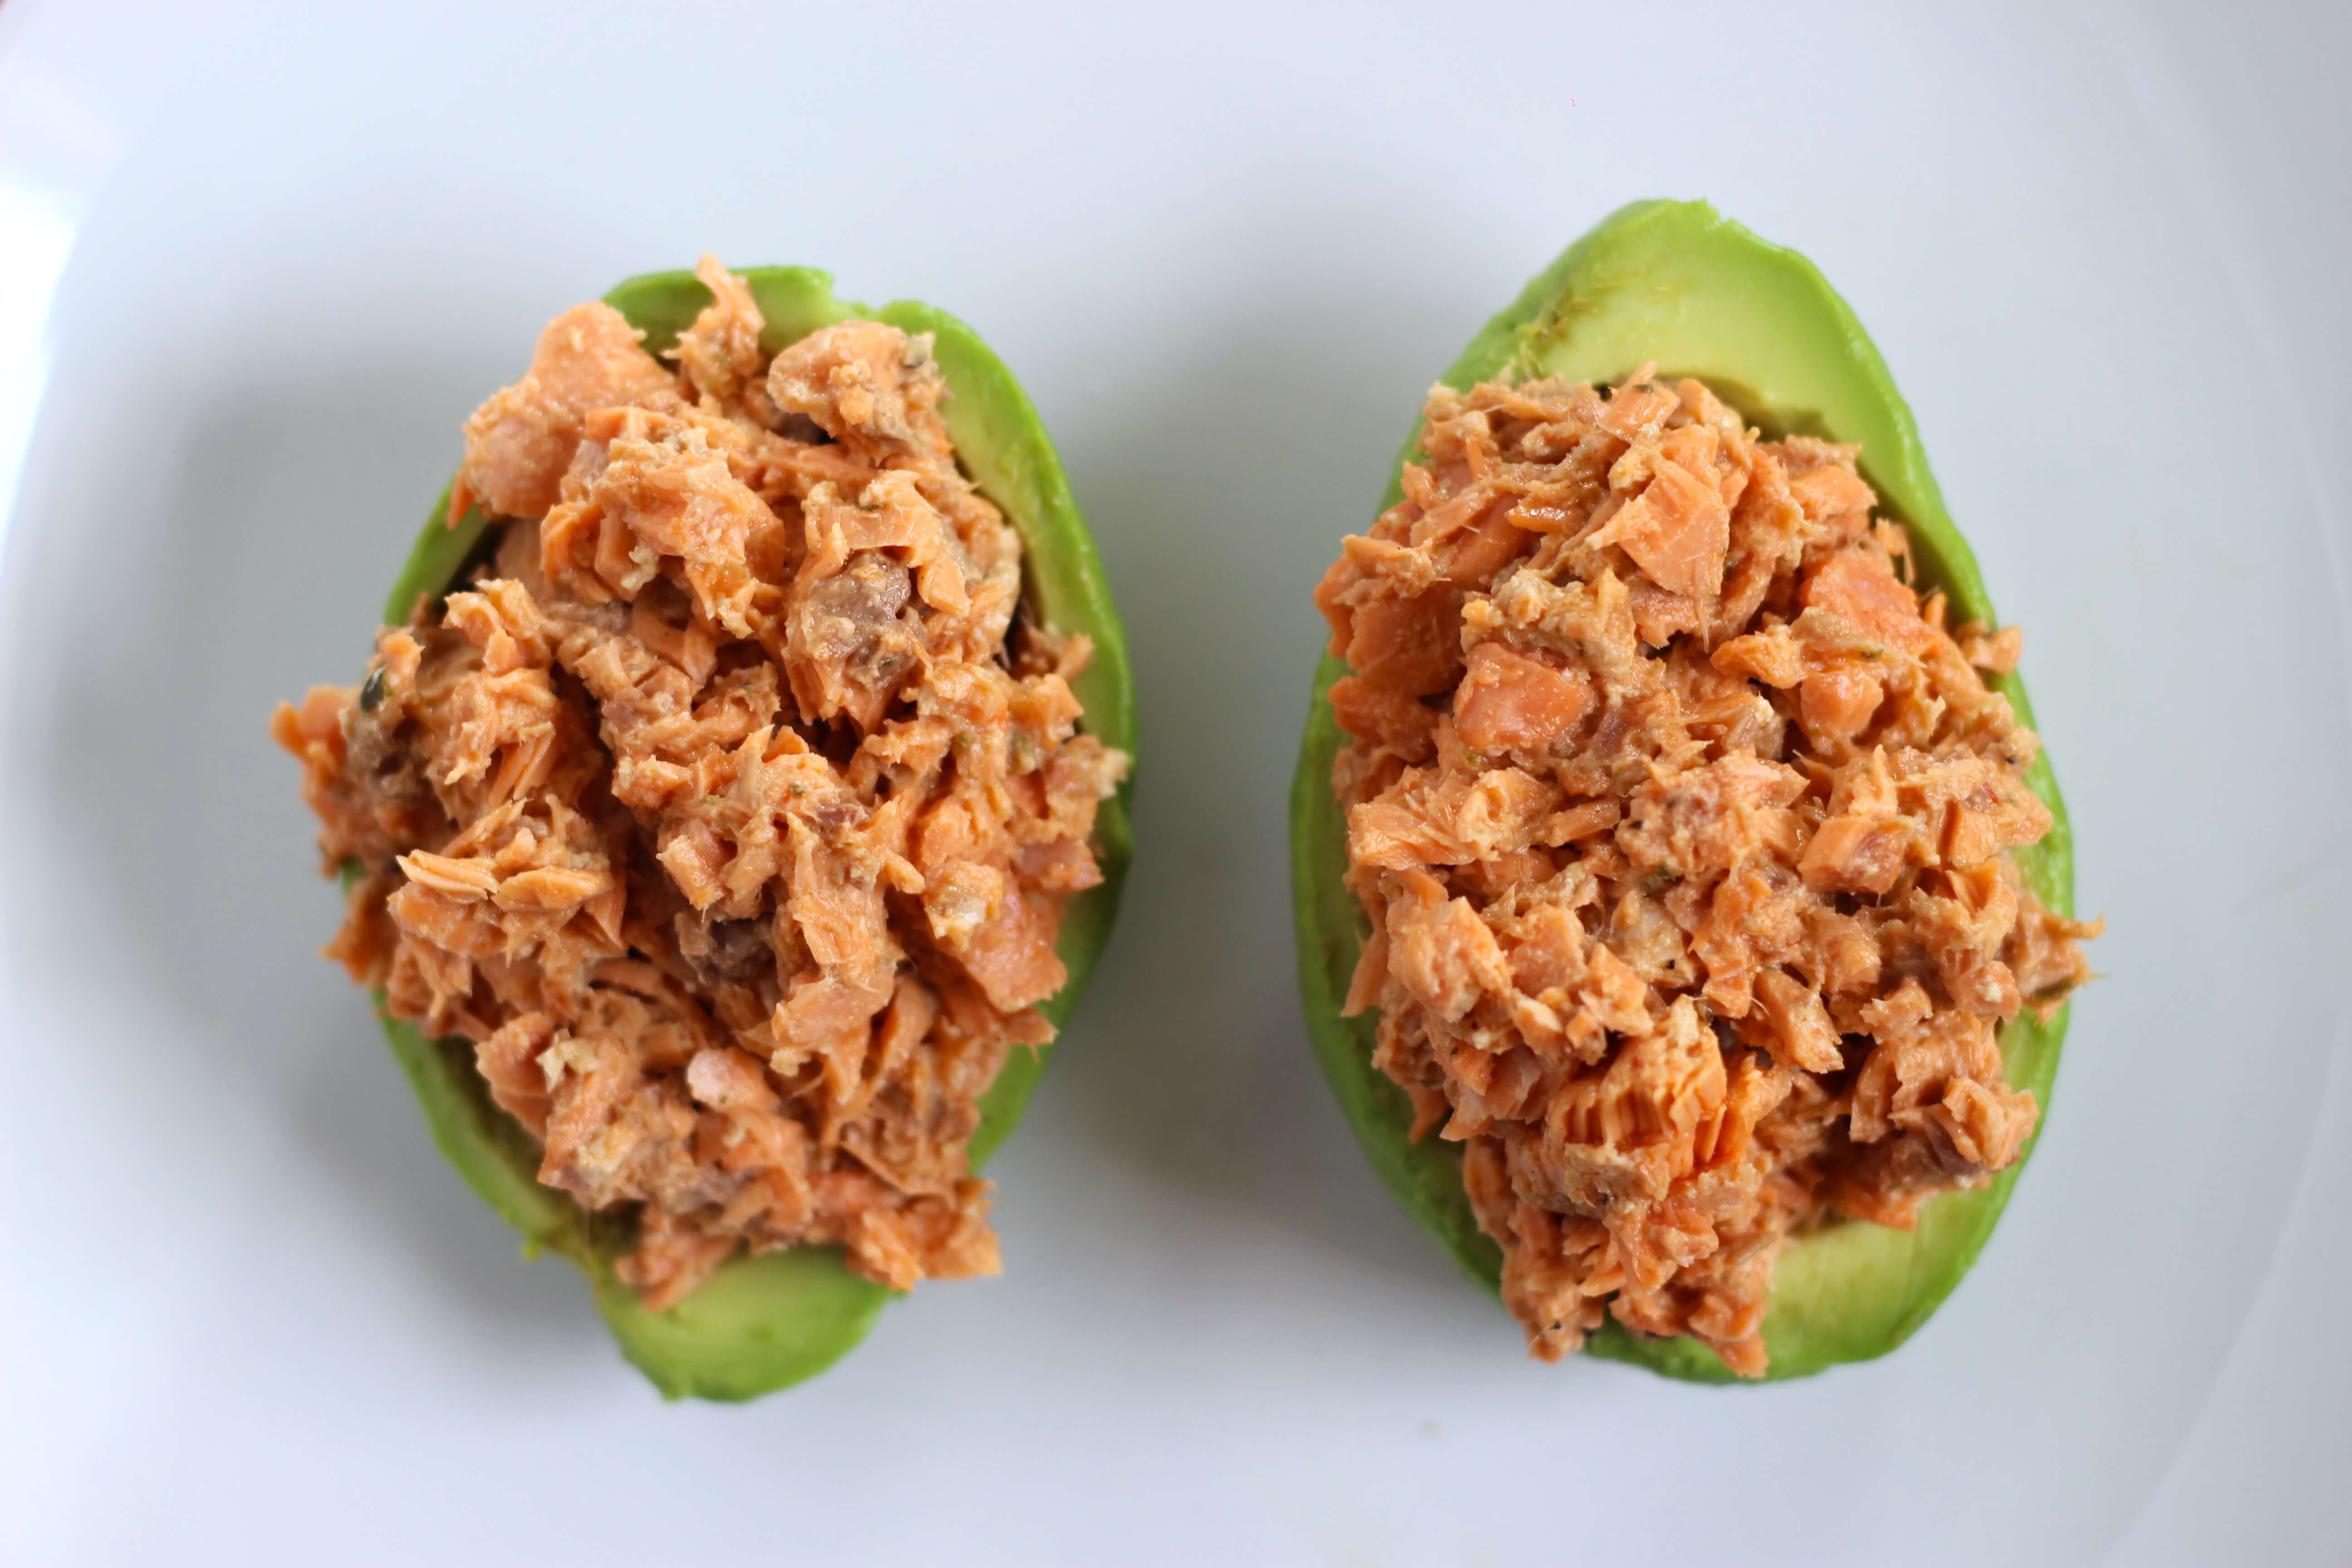 20 Meal Ideas to Help Clients with Eczema: Salmon Stuffed Avocado Boats